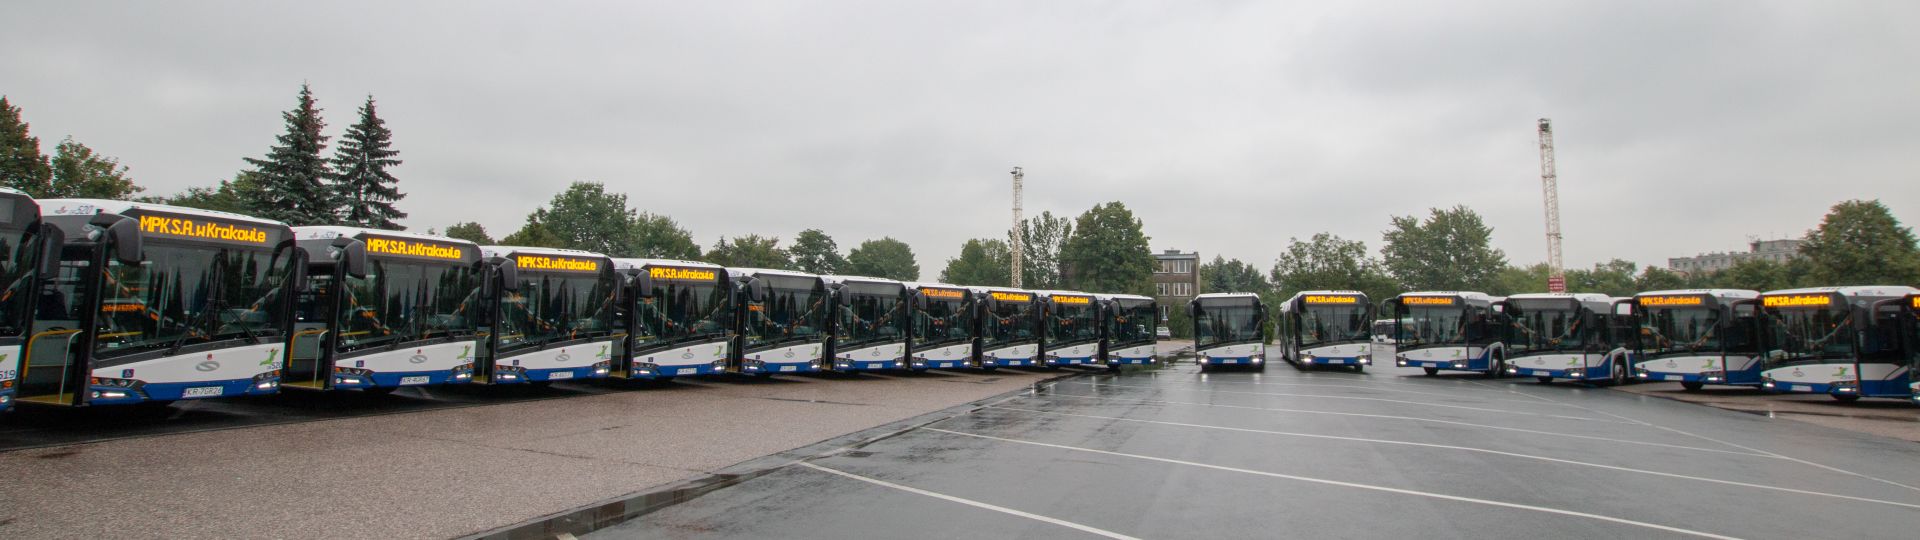 38 new articulated Solaris buses in Cracow